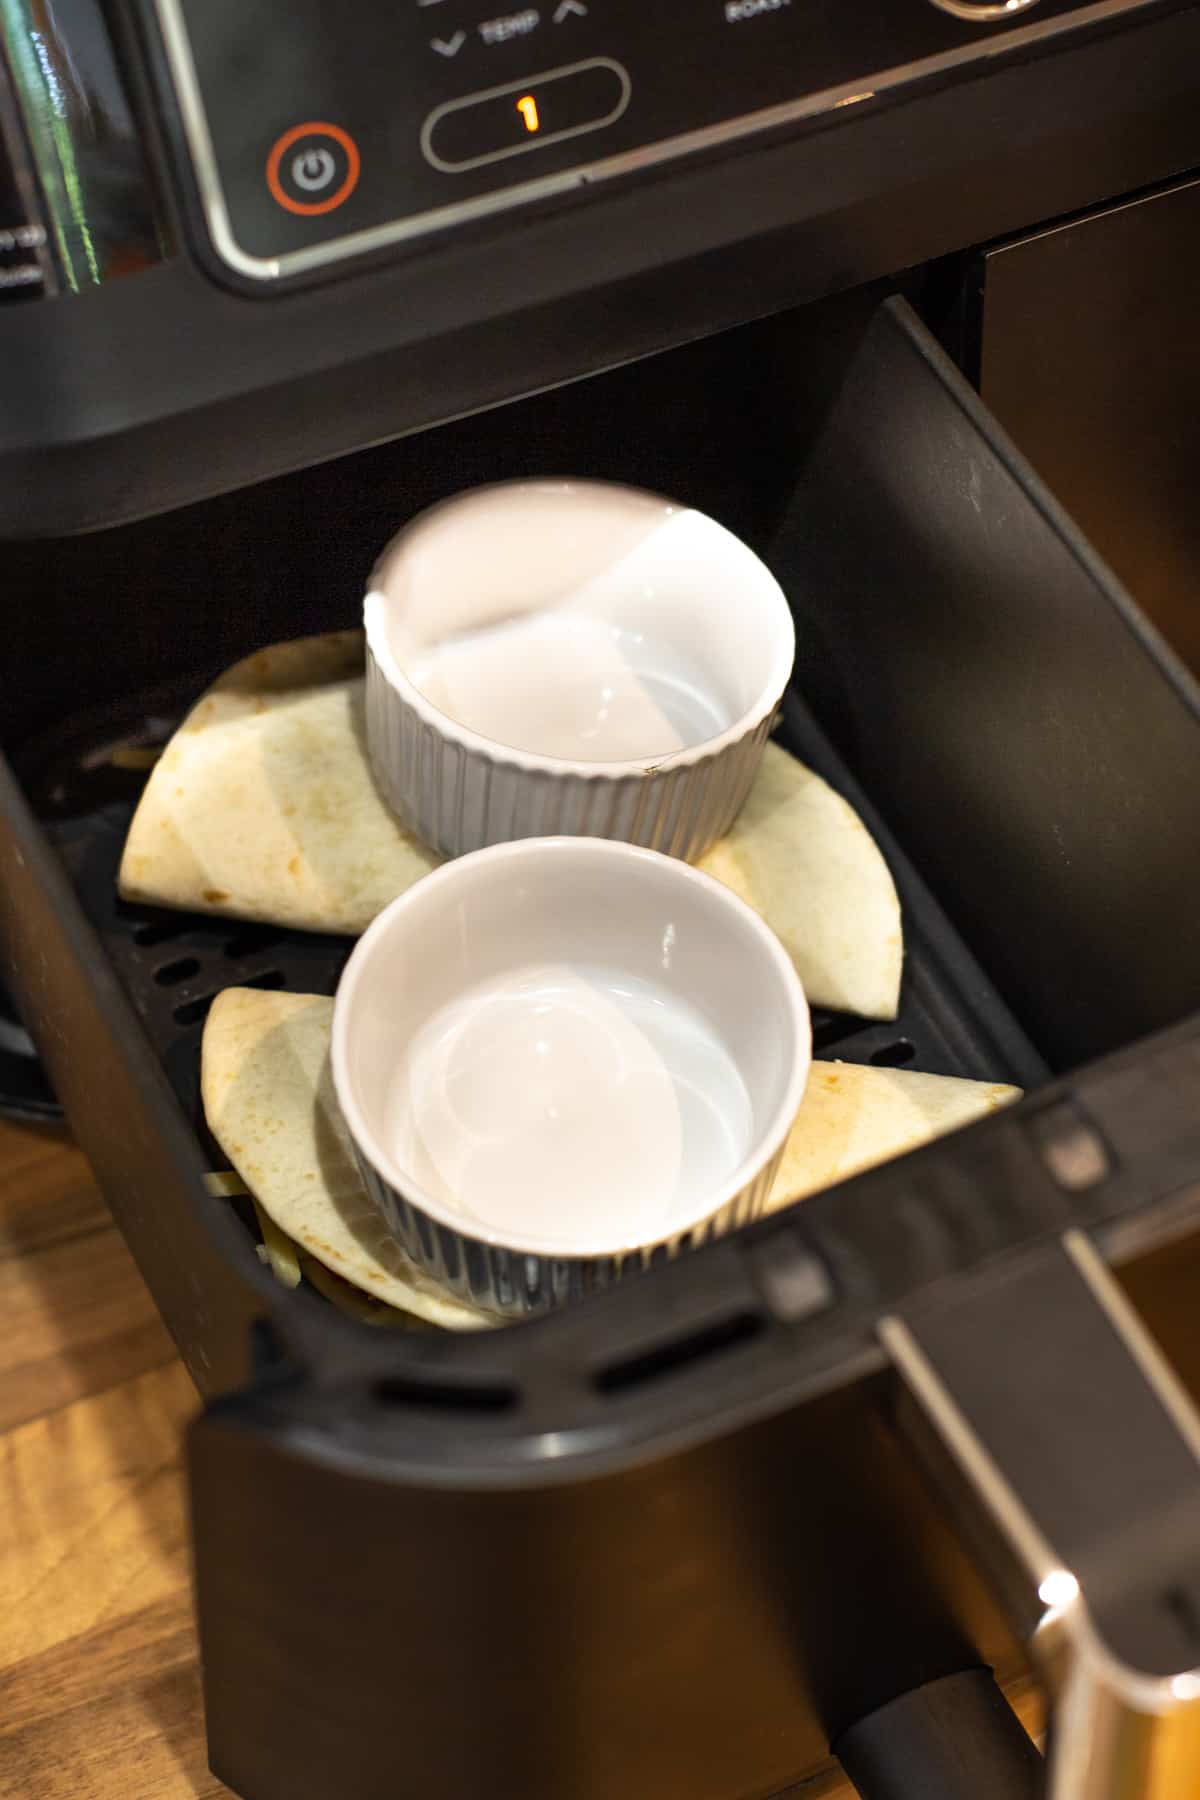 Quesadillas in an air fryer being weighed down with small ramekins.